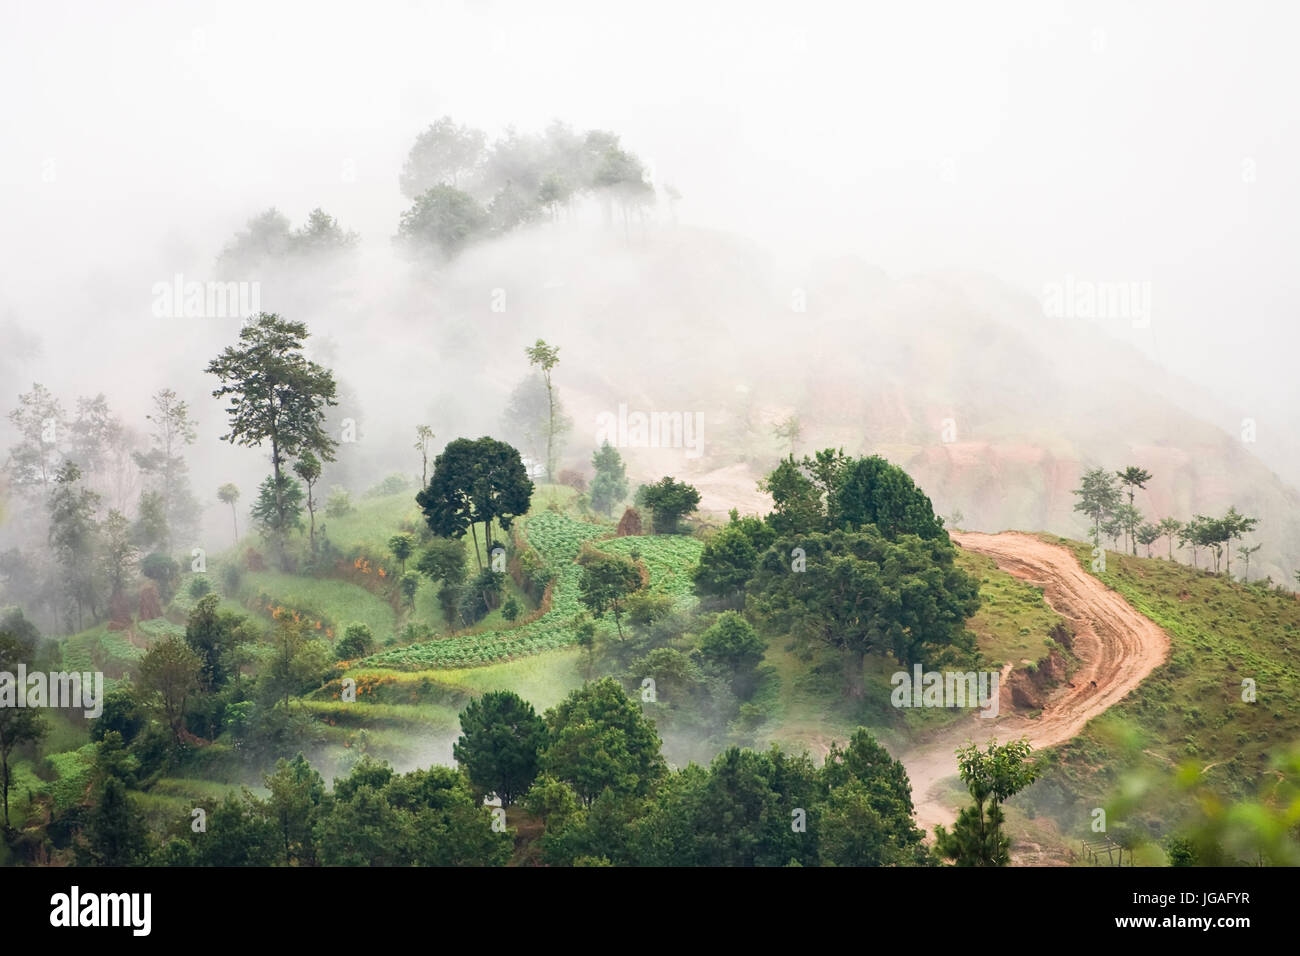 View of the sea of clouds around a small island of land. Nepal, Nagarkot village. Stock Photo